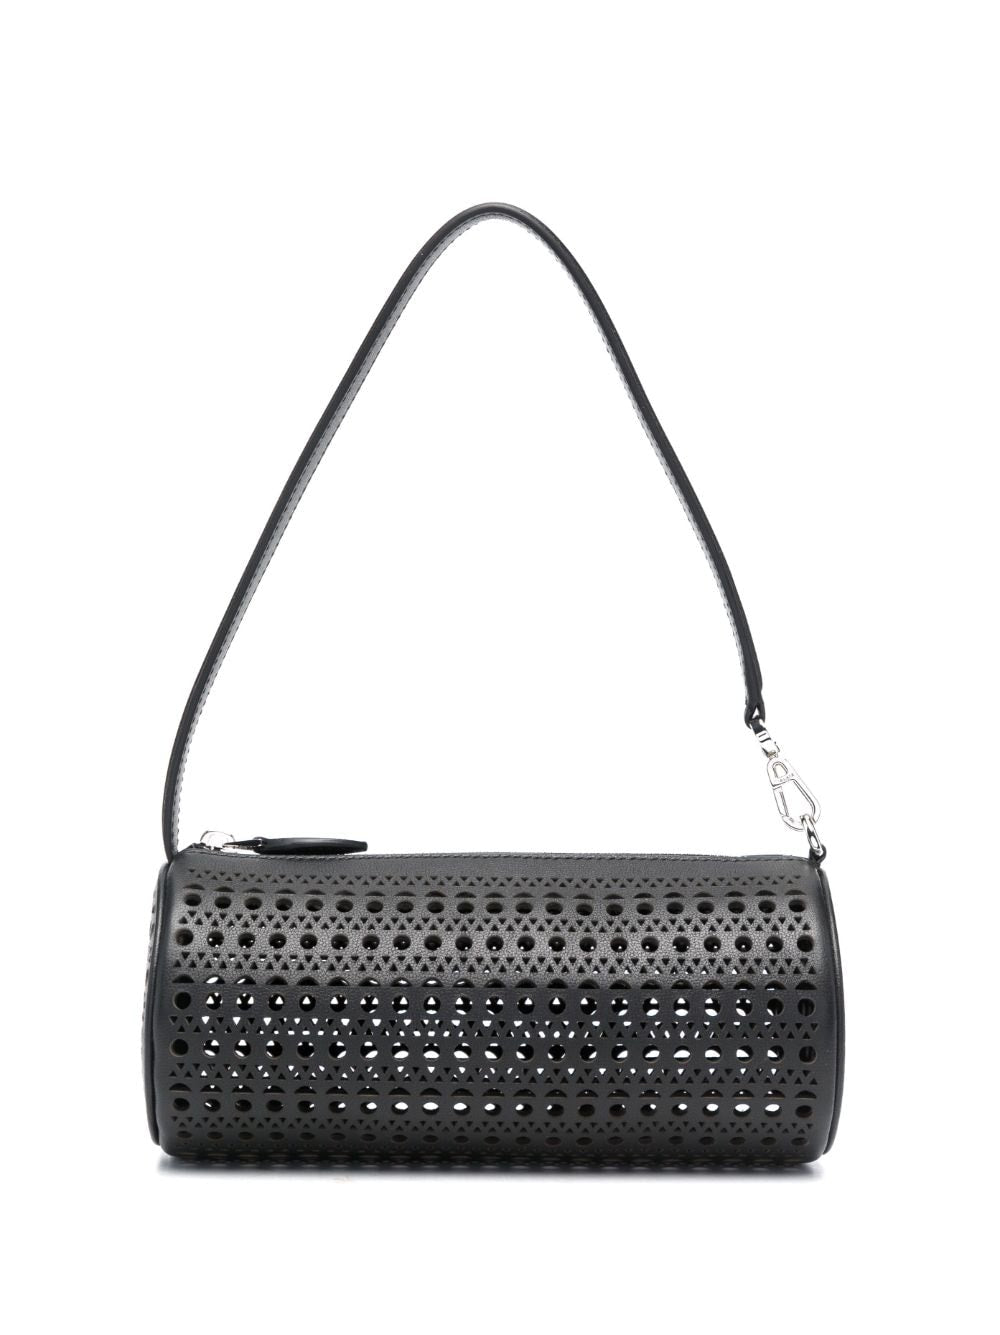 ALAIA Black Calf Leather Small Shoulder Bag with Silver-Tone Hardware and Signature Vienne Pattern for Women